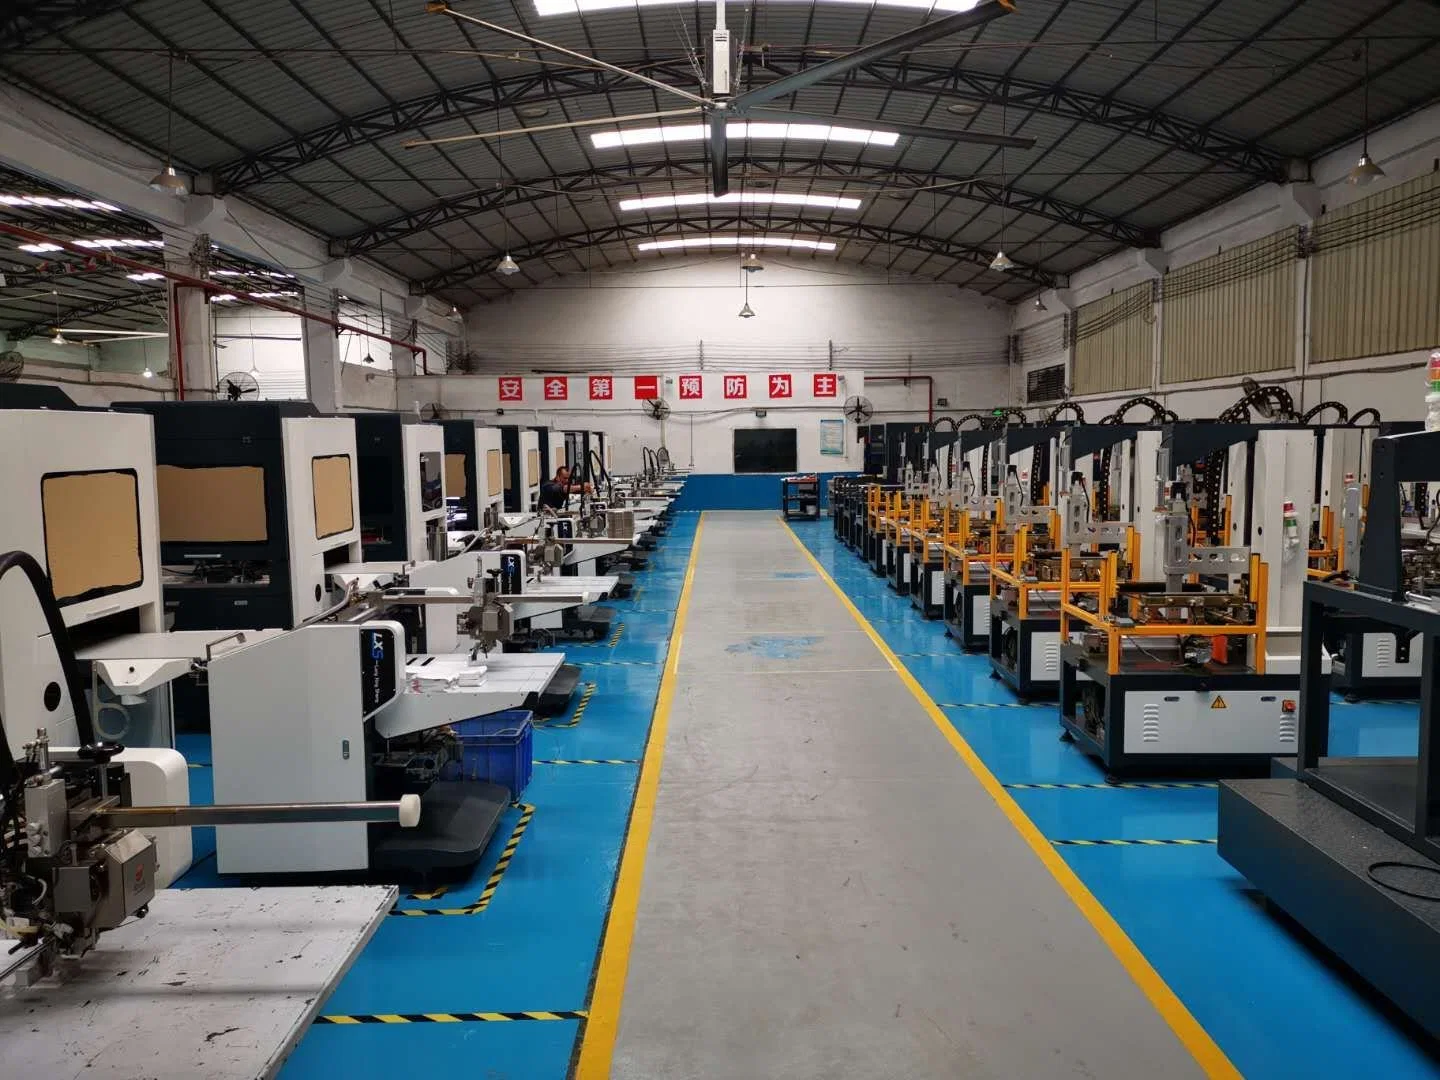 Muti-Functional, Ls-1246g Has Rigid Box Making Function, Hardcover Positioning Function. Can Connect with Four Sides Wrapping Machine to Make Hard Cover.